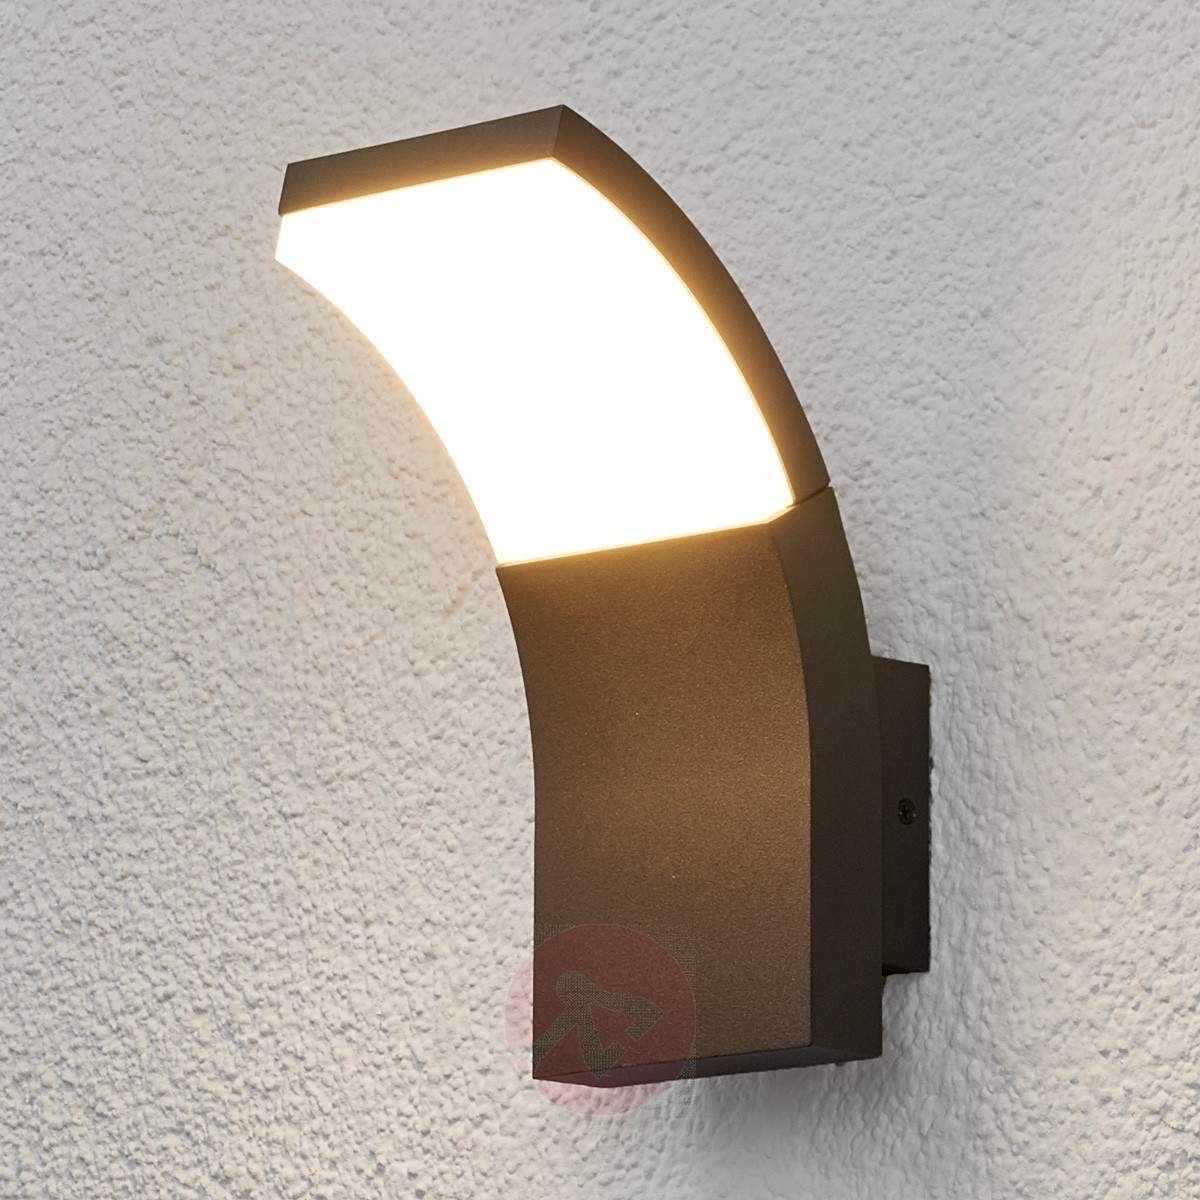 Led Outdoor Wall Light Timm | Lights.co.uk Inside Led Outdoor Wall Lighting (Photo 2 of 15)